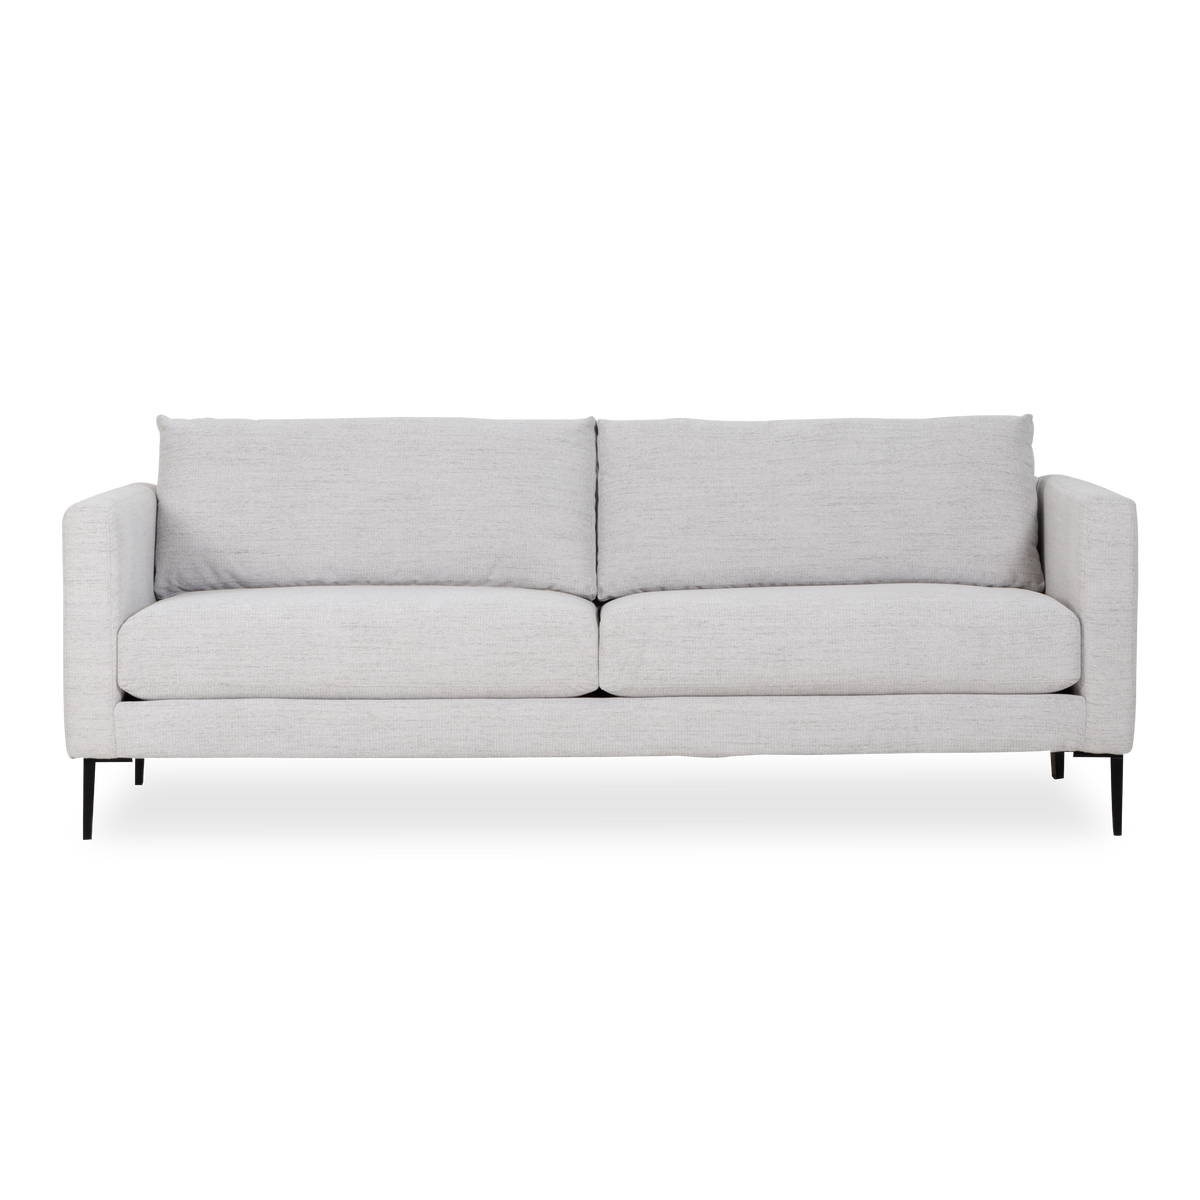 With its slim tailored styling, the Solange Sofa offers a simple and contemporary look.